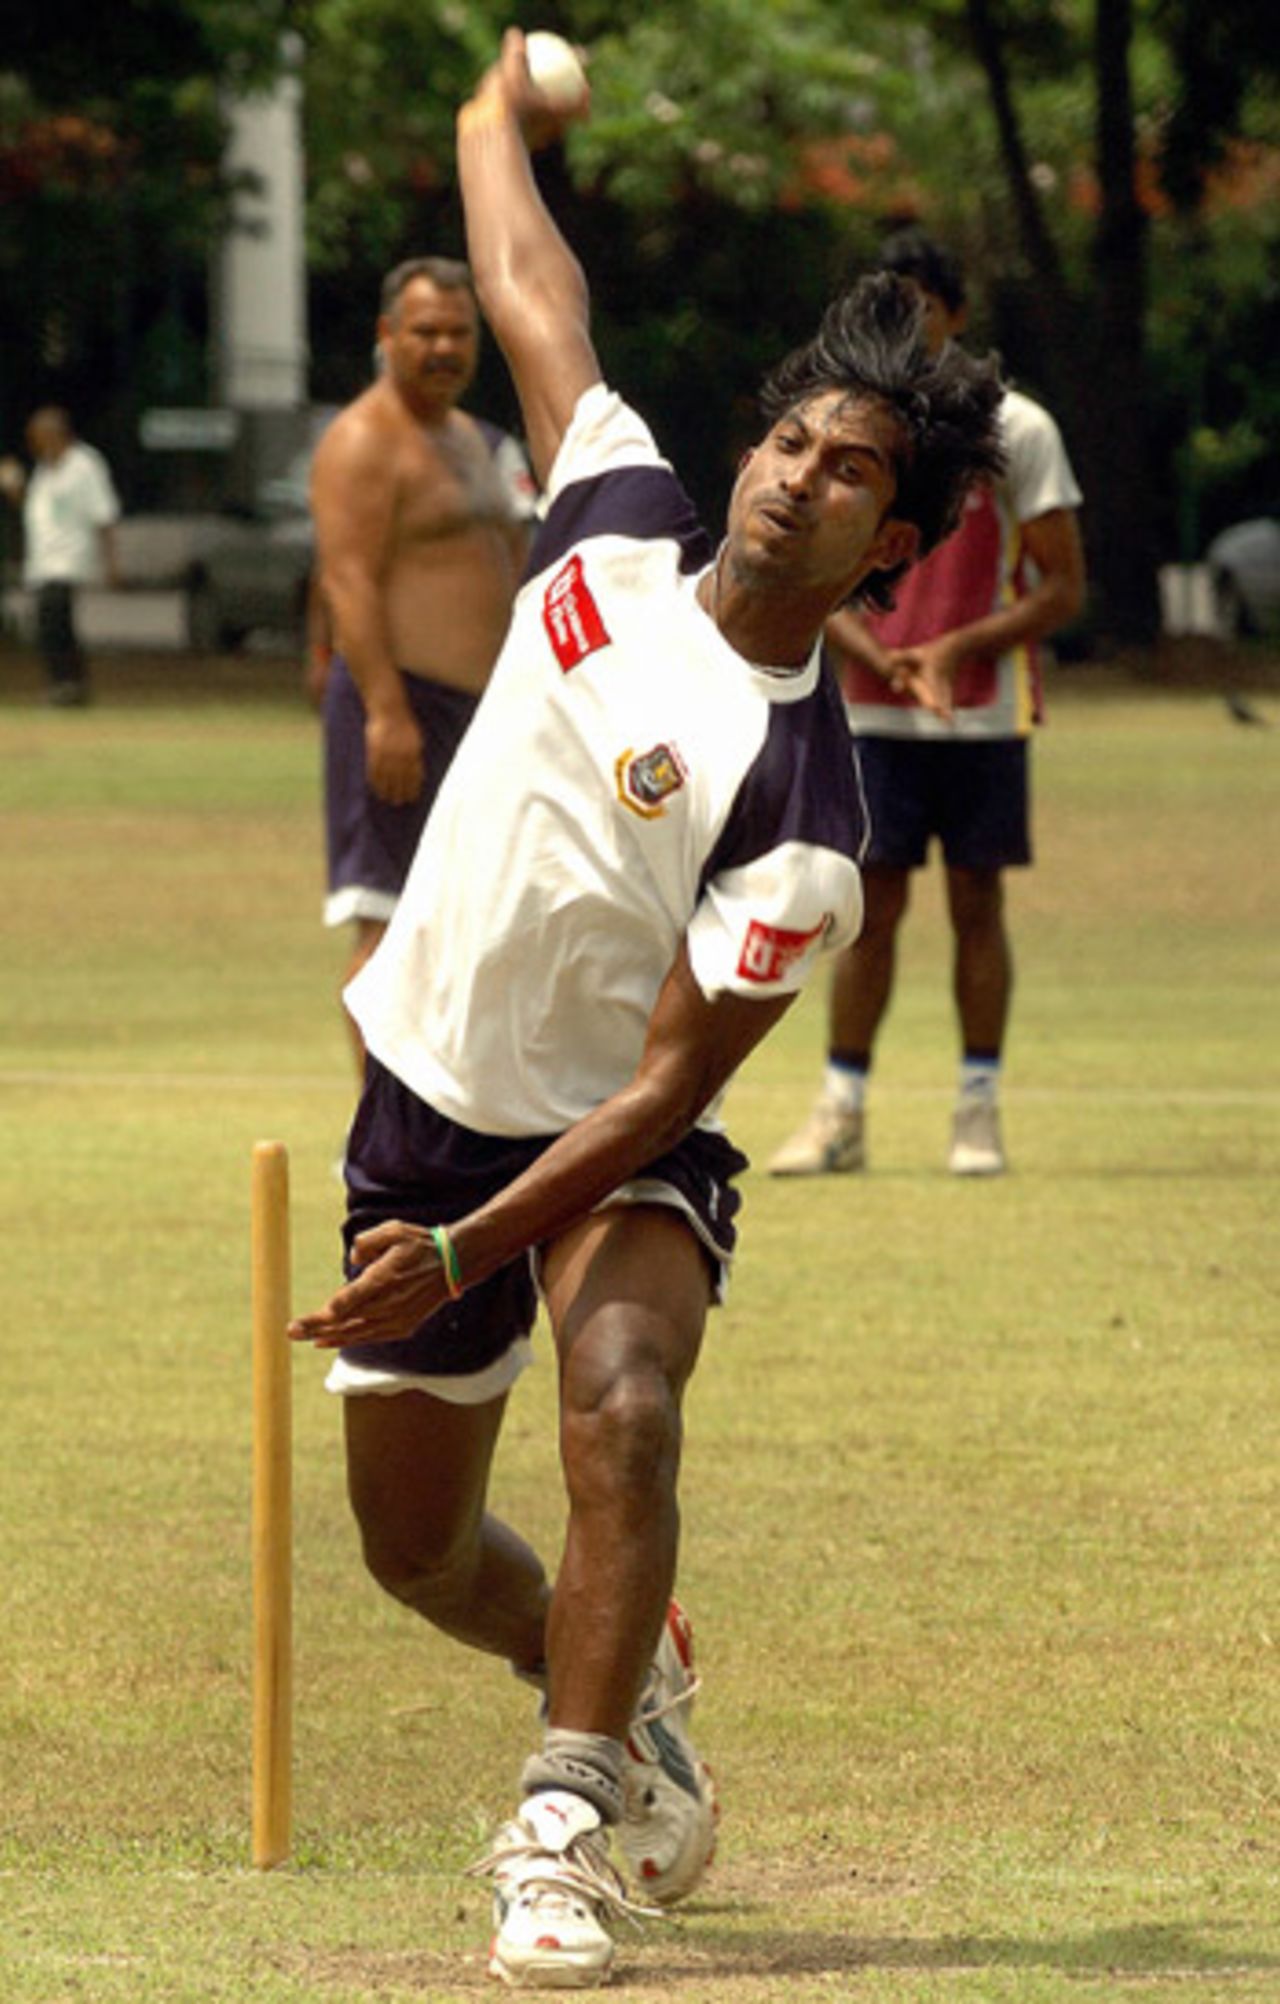 Tapash Baisya bowls during a training session, Colombo, September 1, 2005